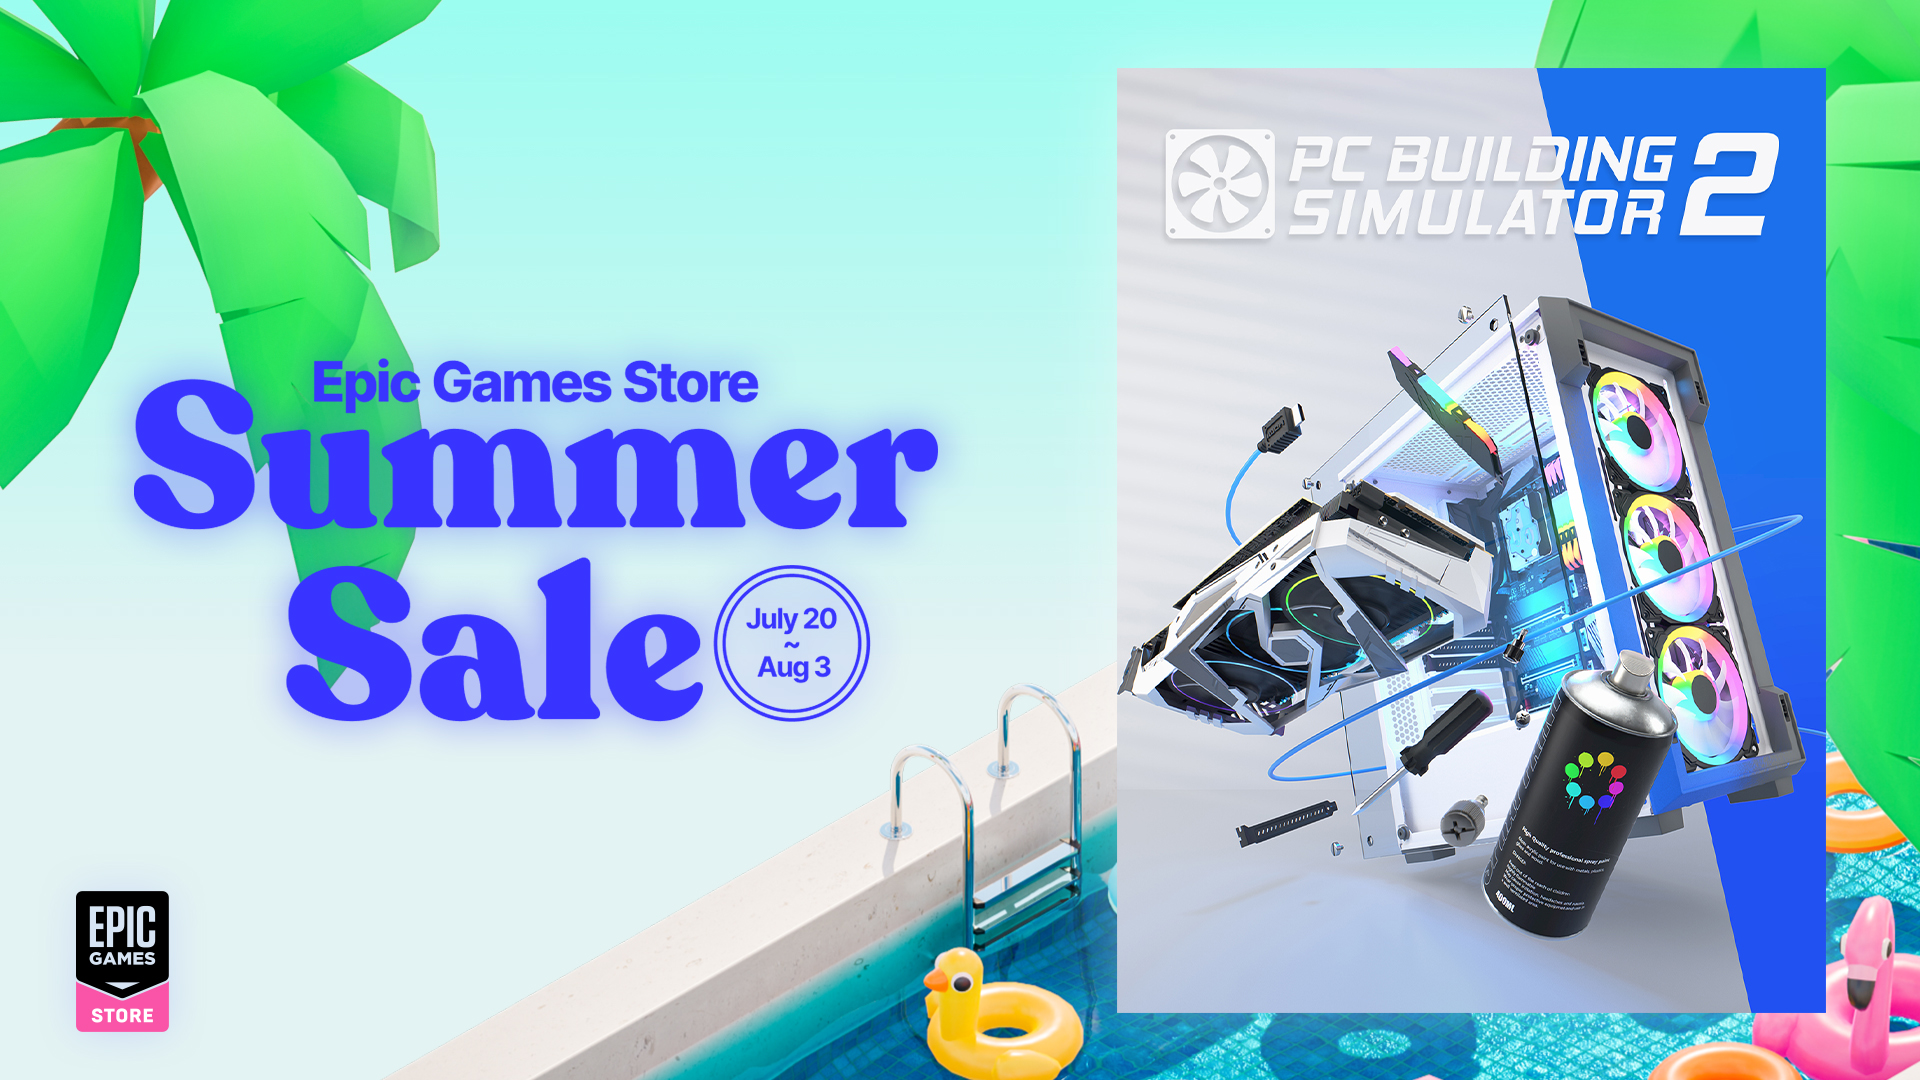 PC Building Simulator 2  Download and Buy Today - Epic Games Store